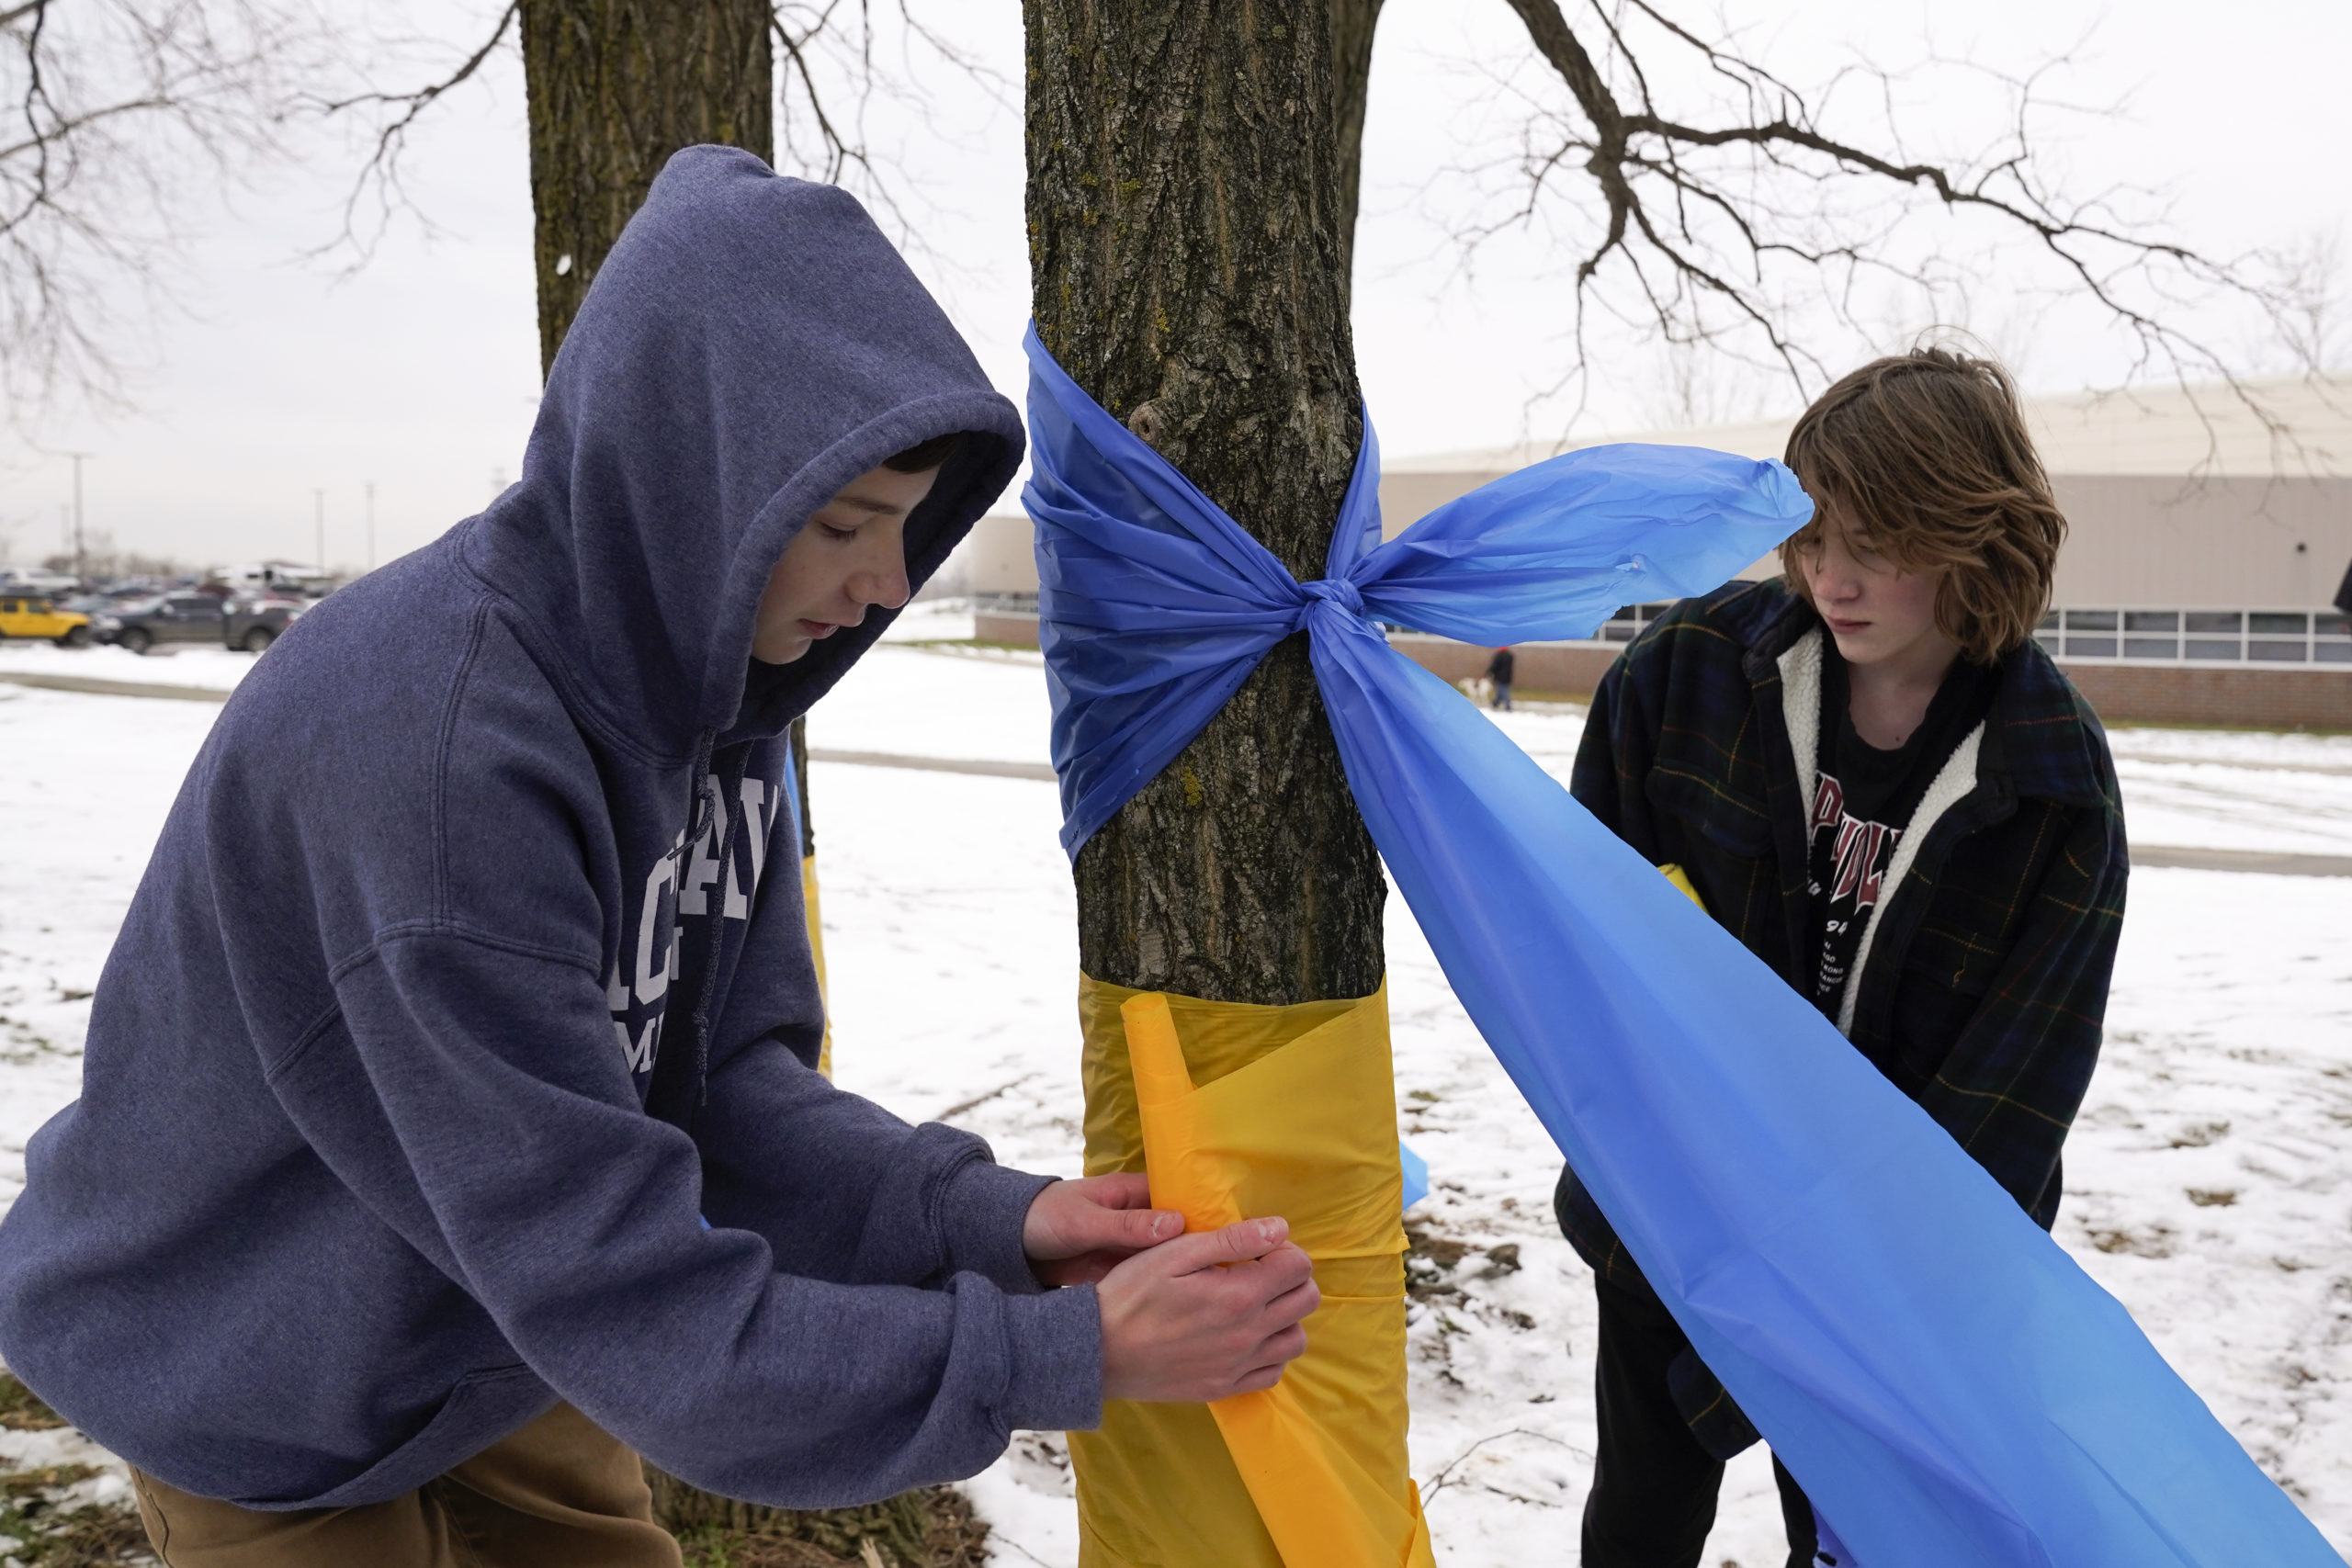 students respond to traumatic event after school shooting by tying ribbons around trees...